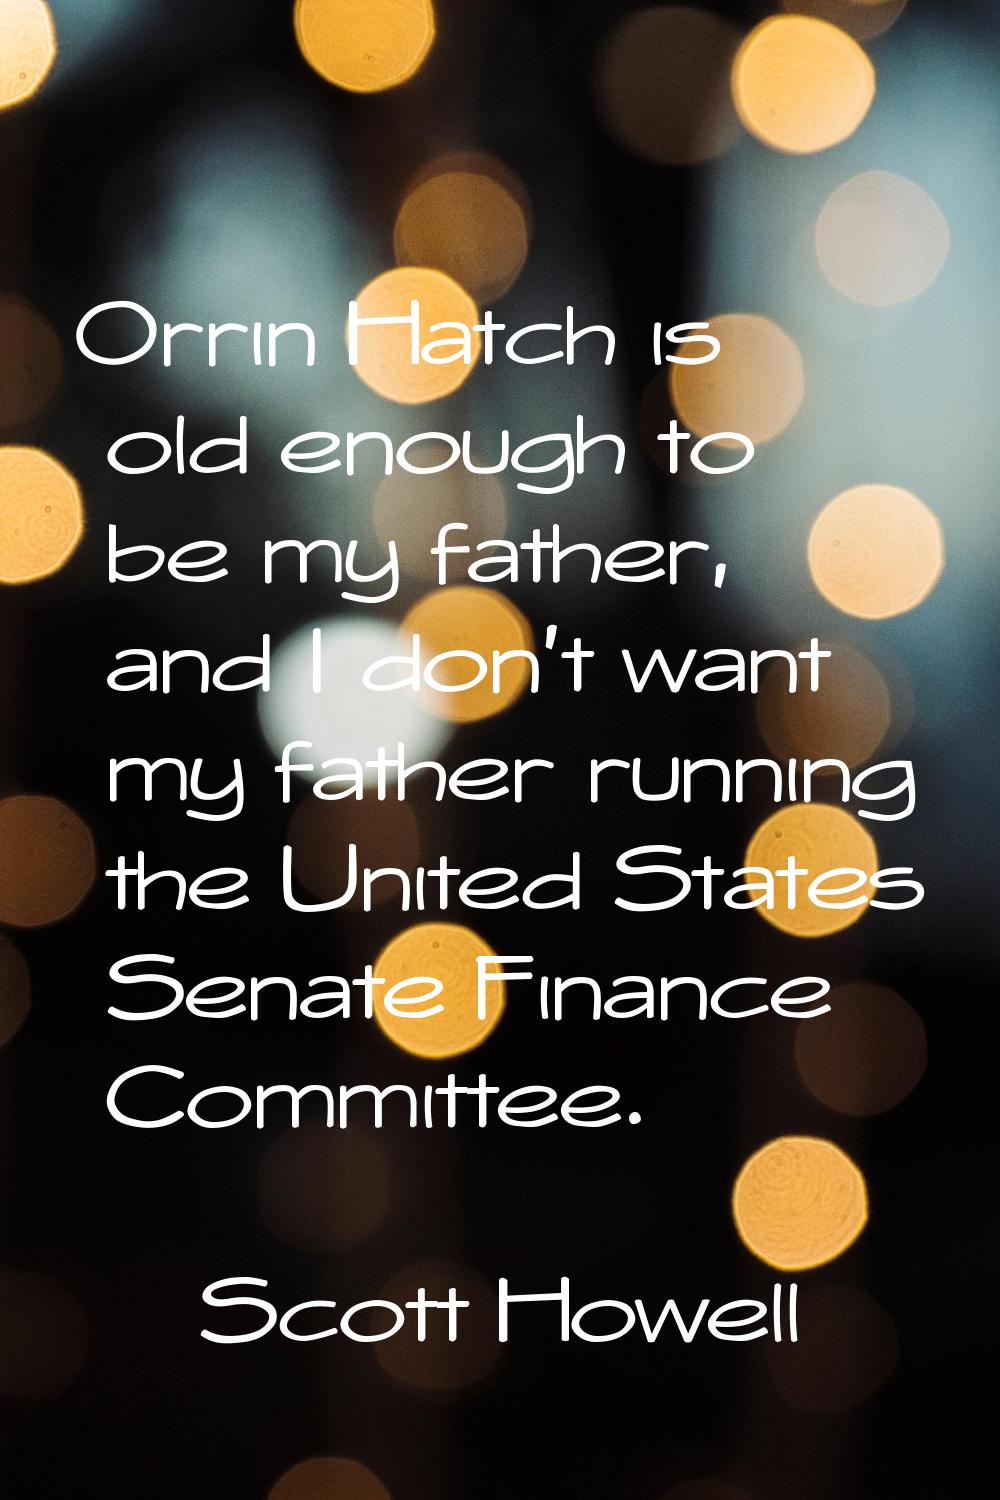 Orrin Hatch is old enough to be my father, and I don't want my father running the United States Sen